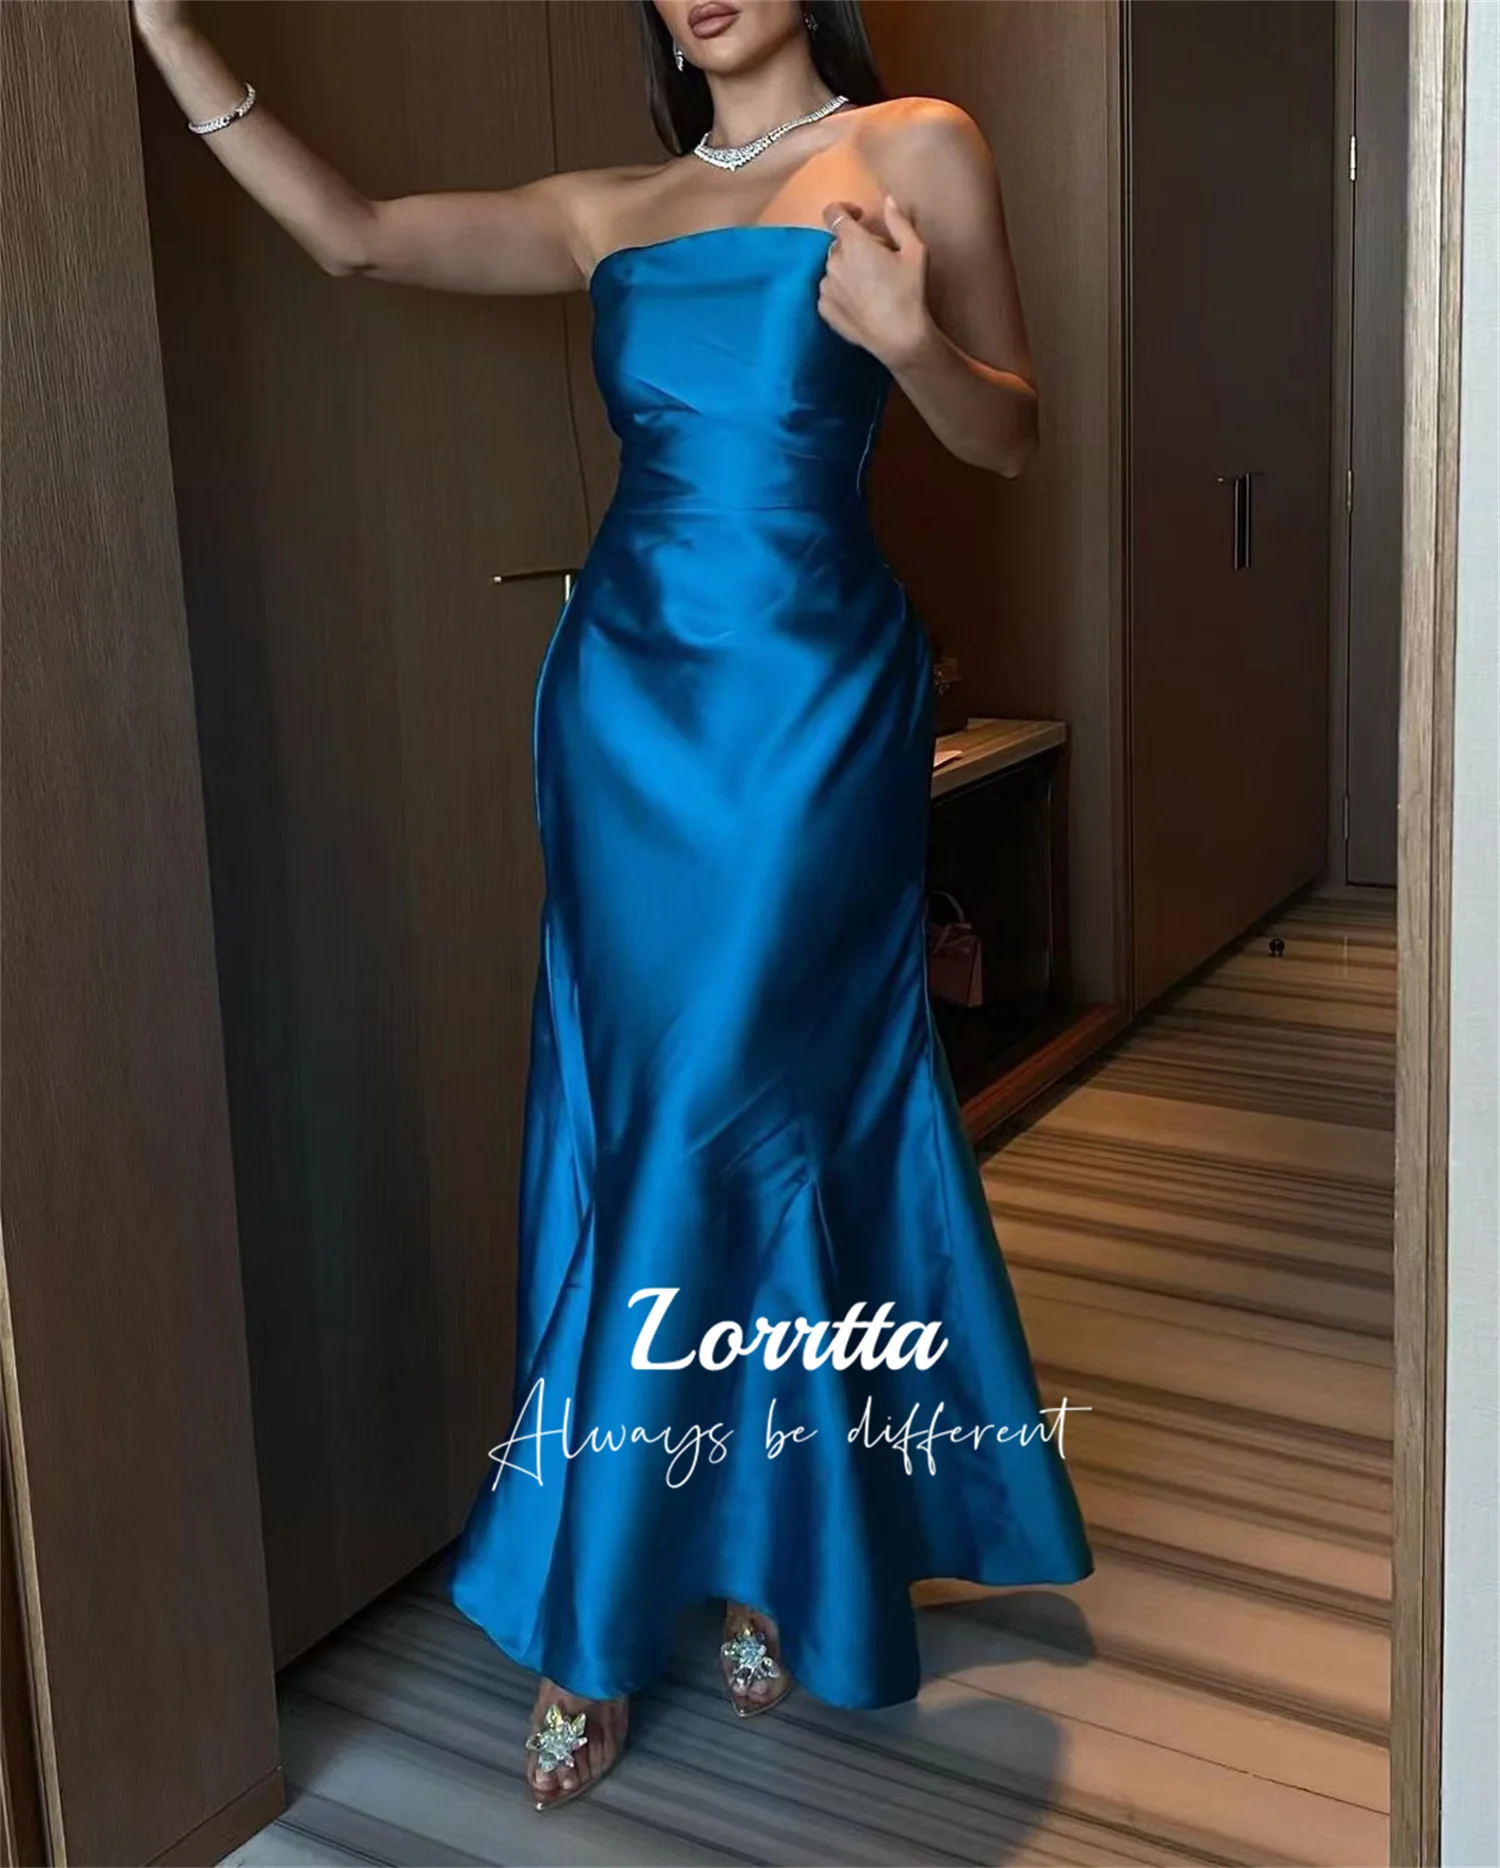 

Lorrtta Blue Fishtail Simple Tube Top Strapless Ankle Length Cocktail Party Dresses for Prom Luxury Special Events Evening Dress